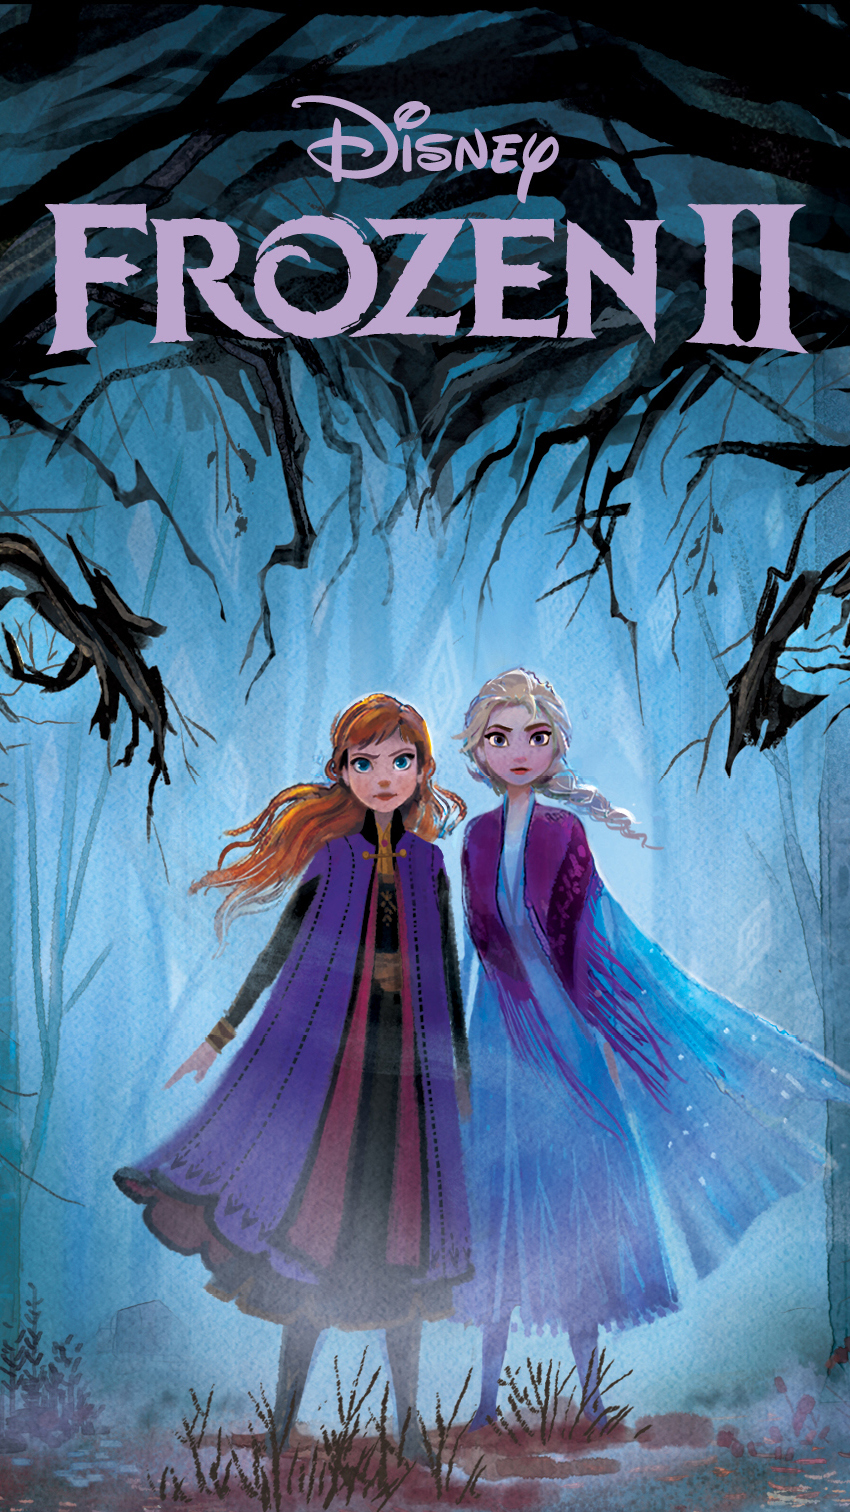 frozen wallpaper for phone,fiction,cg artwork,poster,fictional character,movie